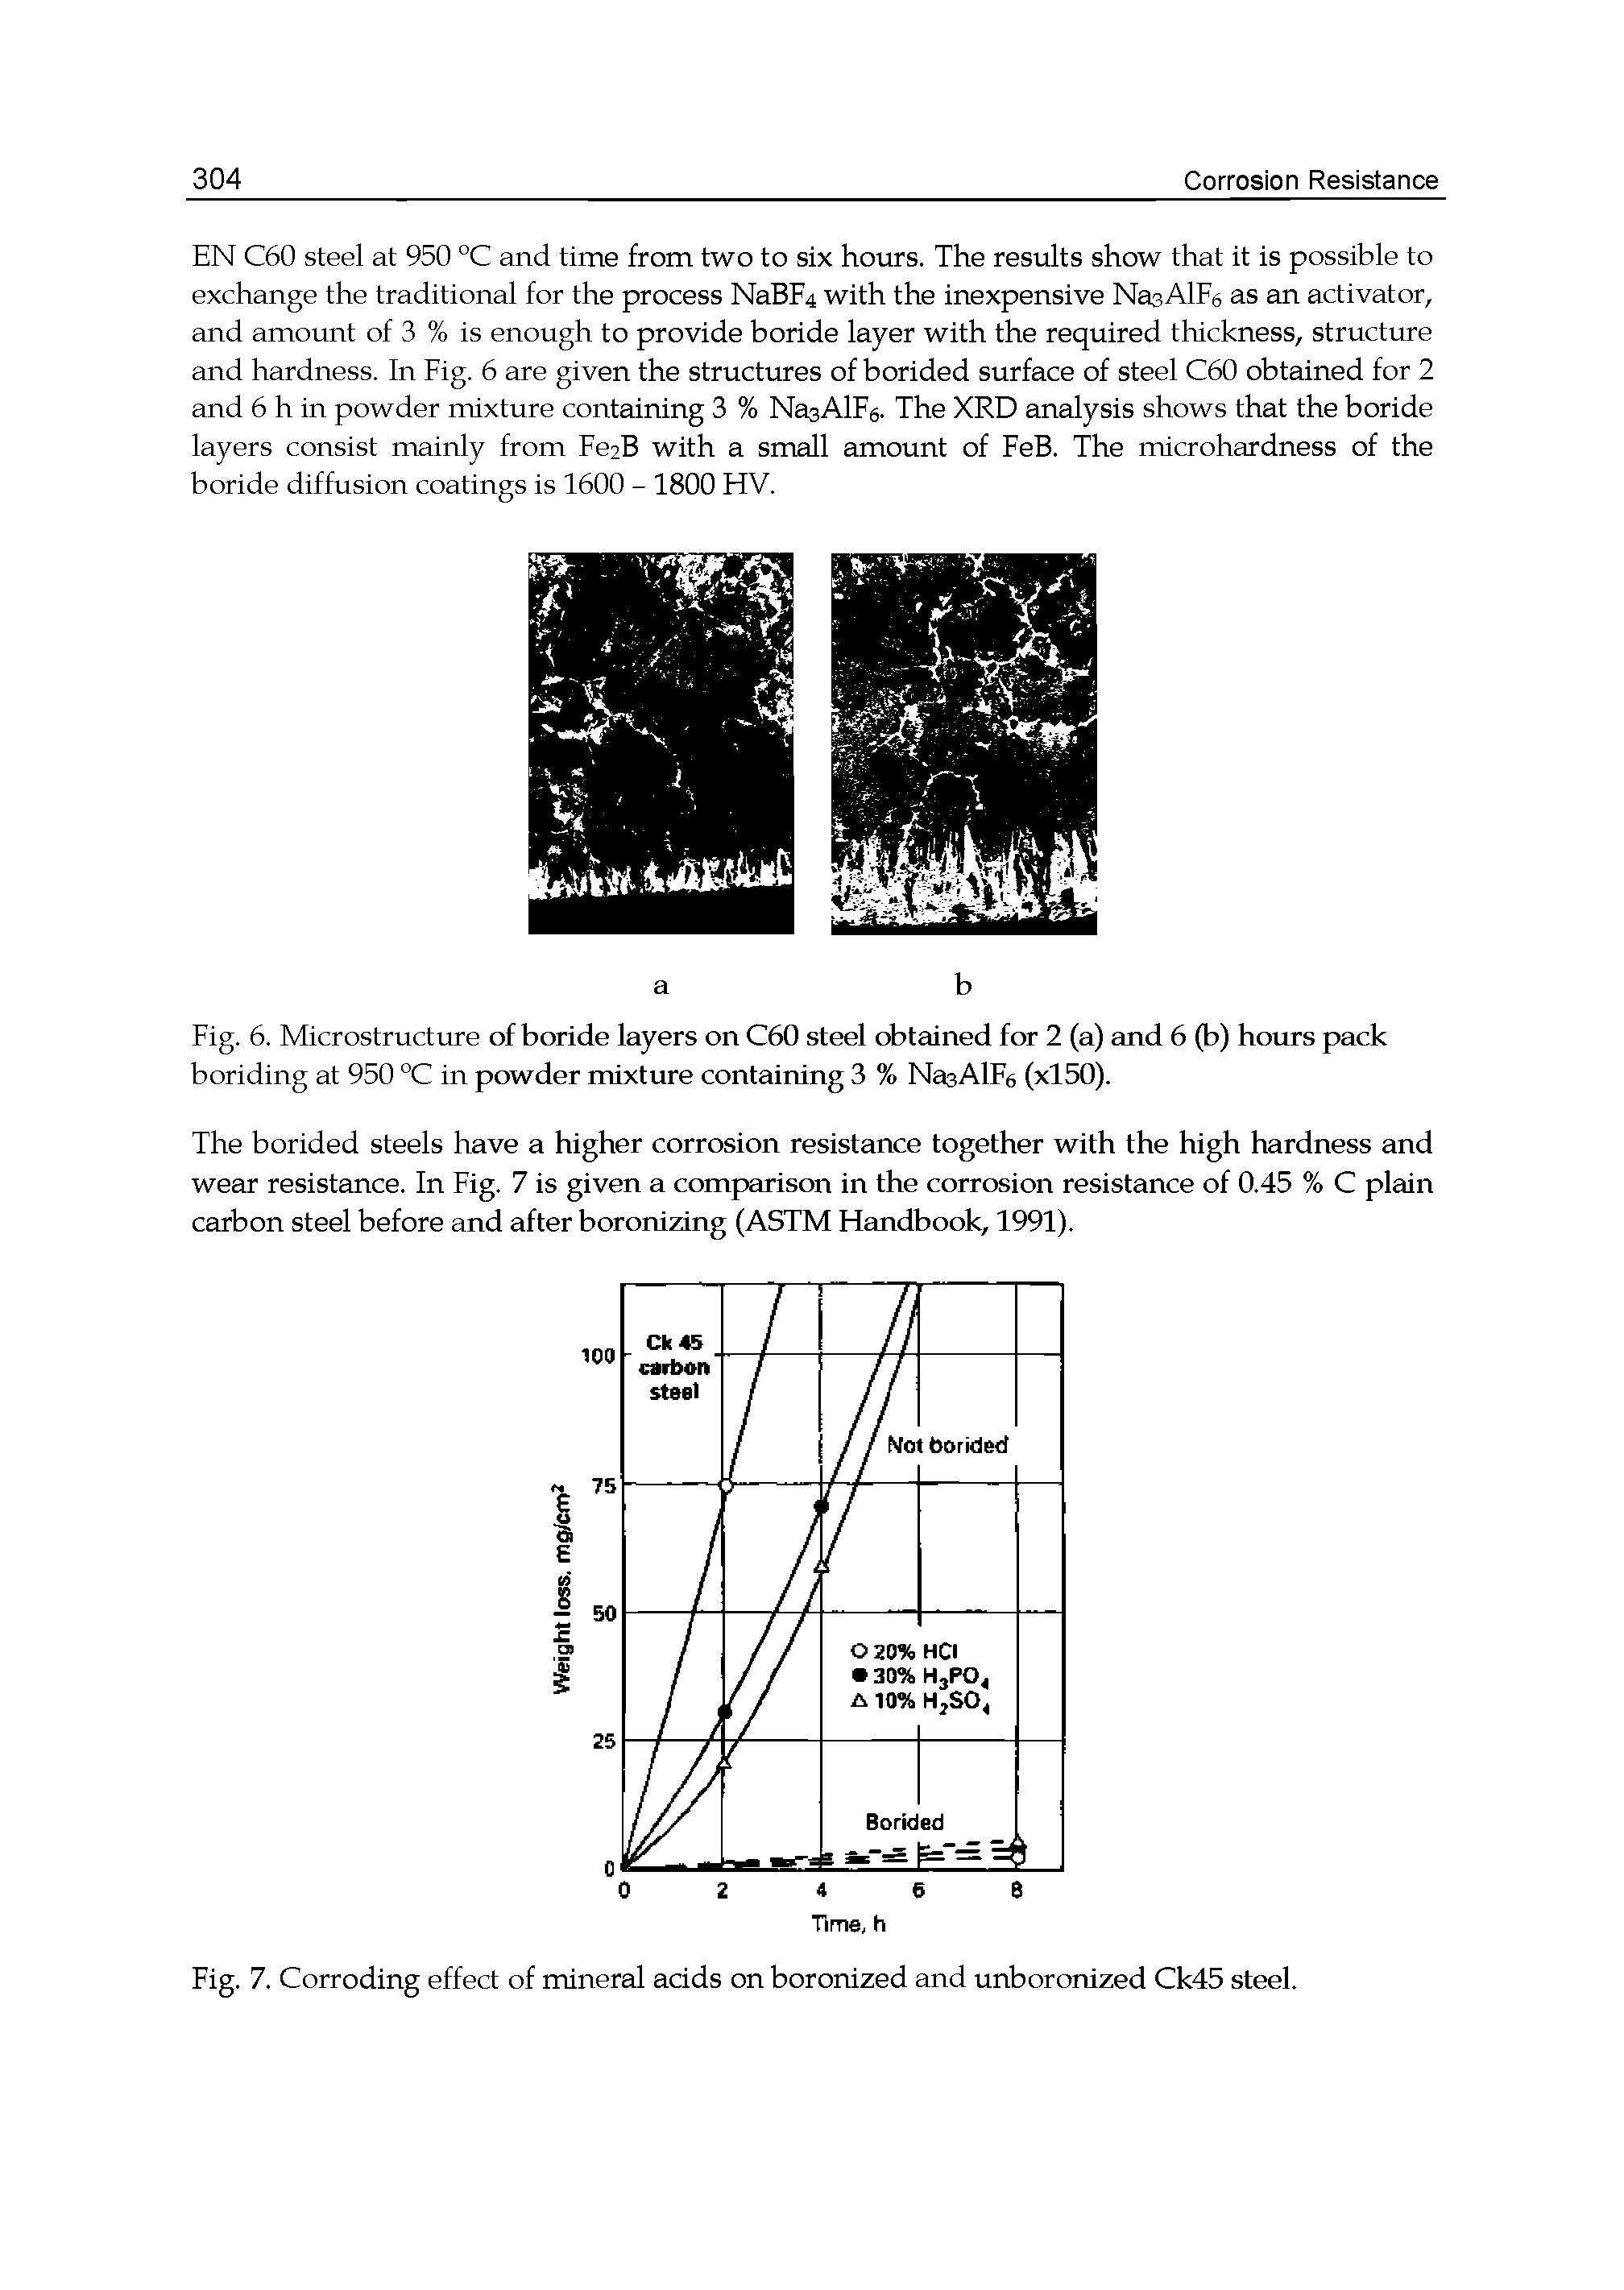 Fig. 6. Microstructure of boride layers on C60 steel obtained for 2 (a) and 6 (b) hours p>ack boriding at 950 °C in powder mixture containing 3 % NasAlFe (xl50).